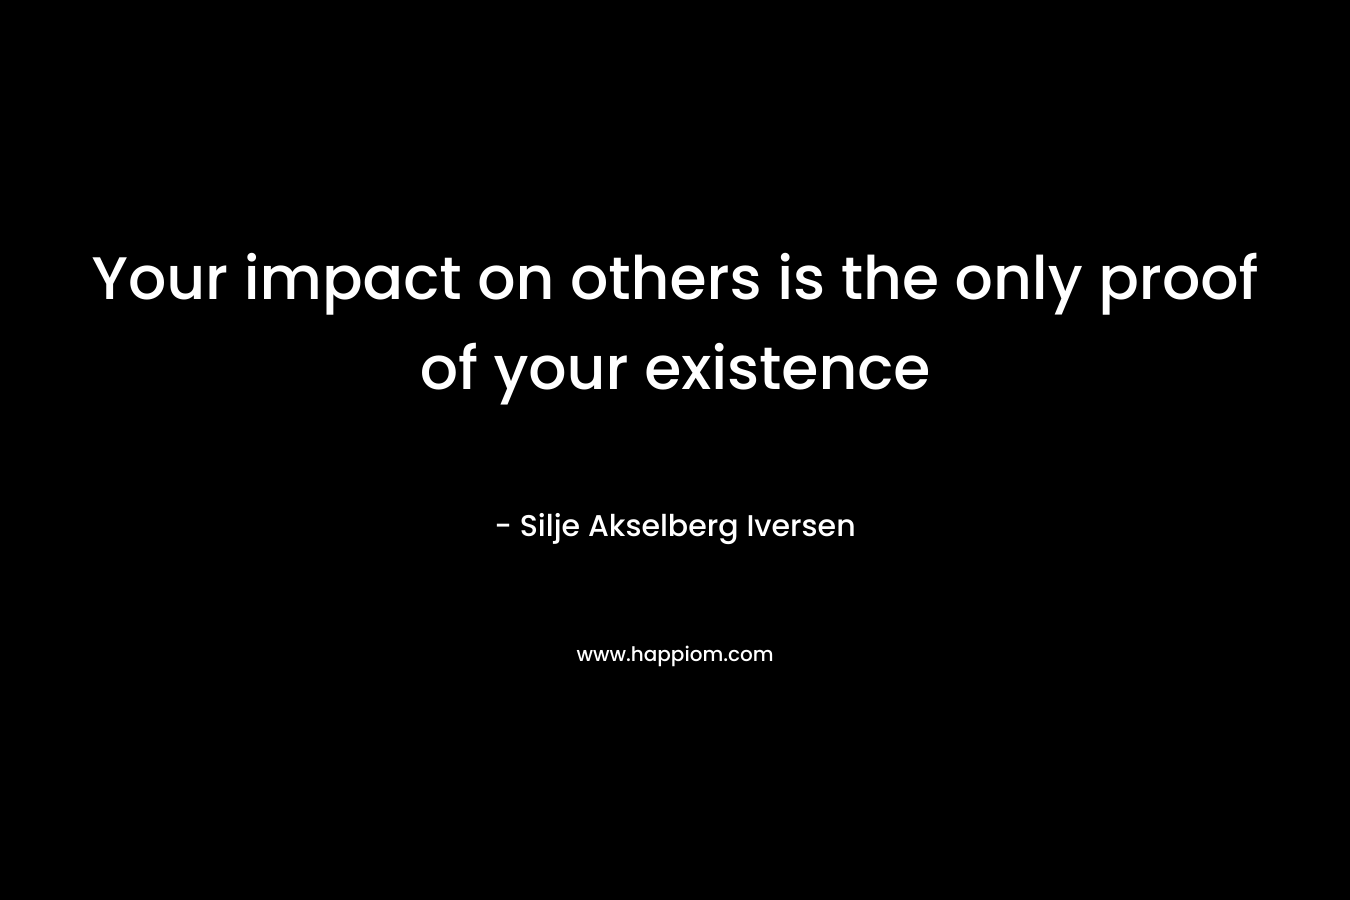 Your impact on others is the only proof of your existence – Silje Akselberg Iversen